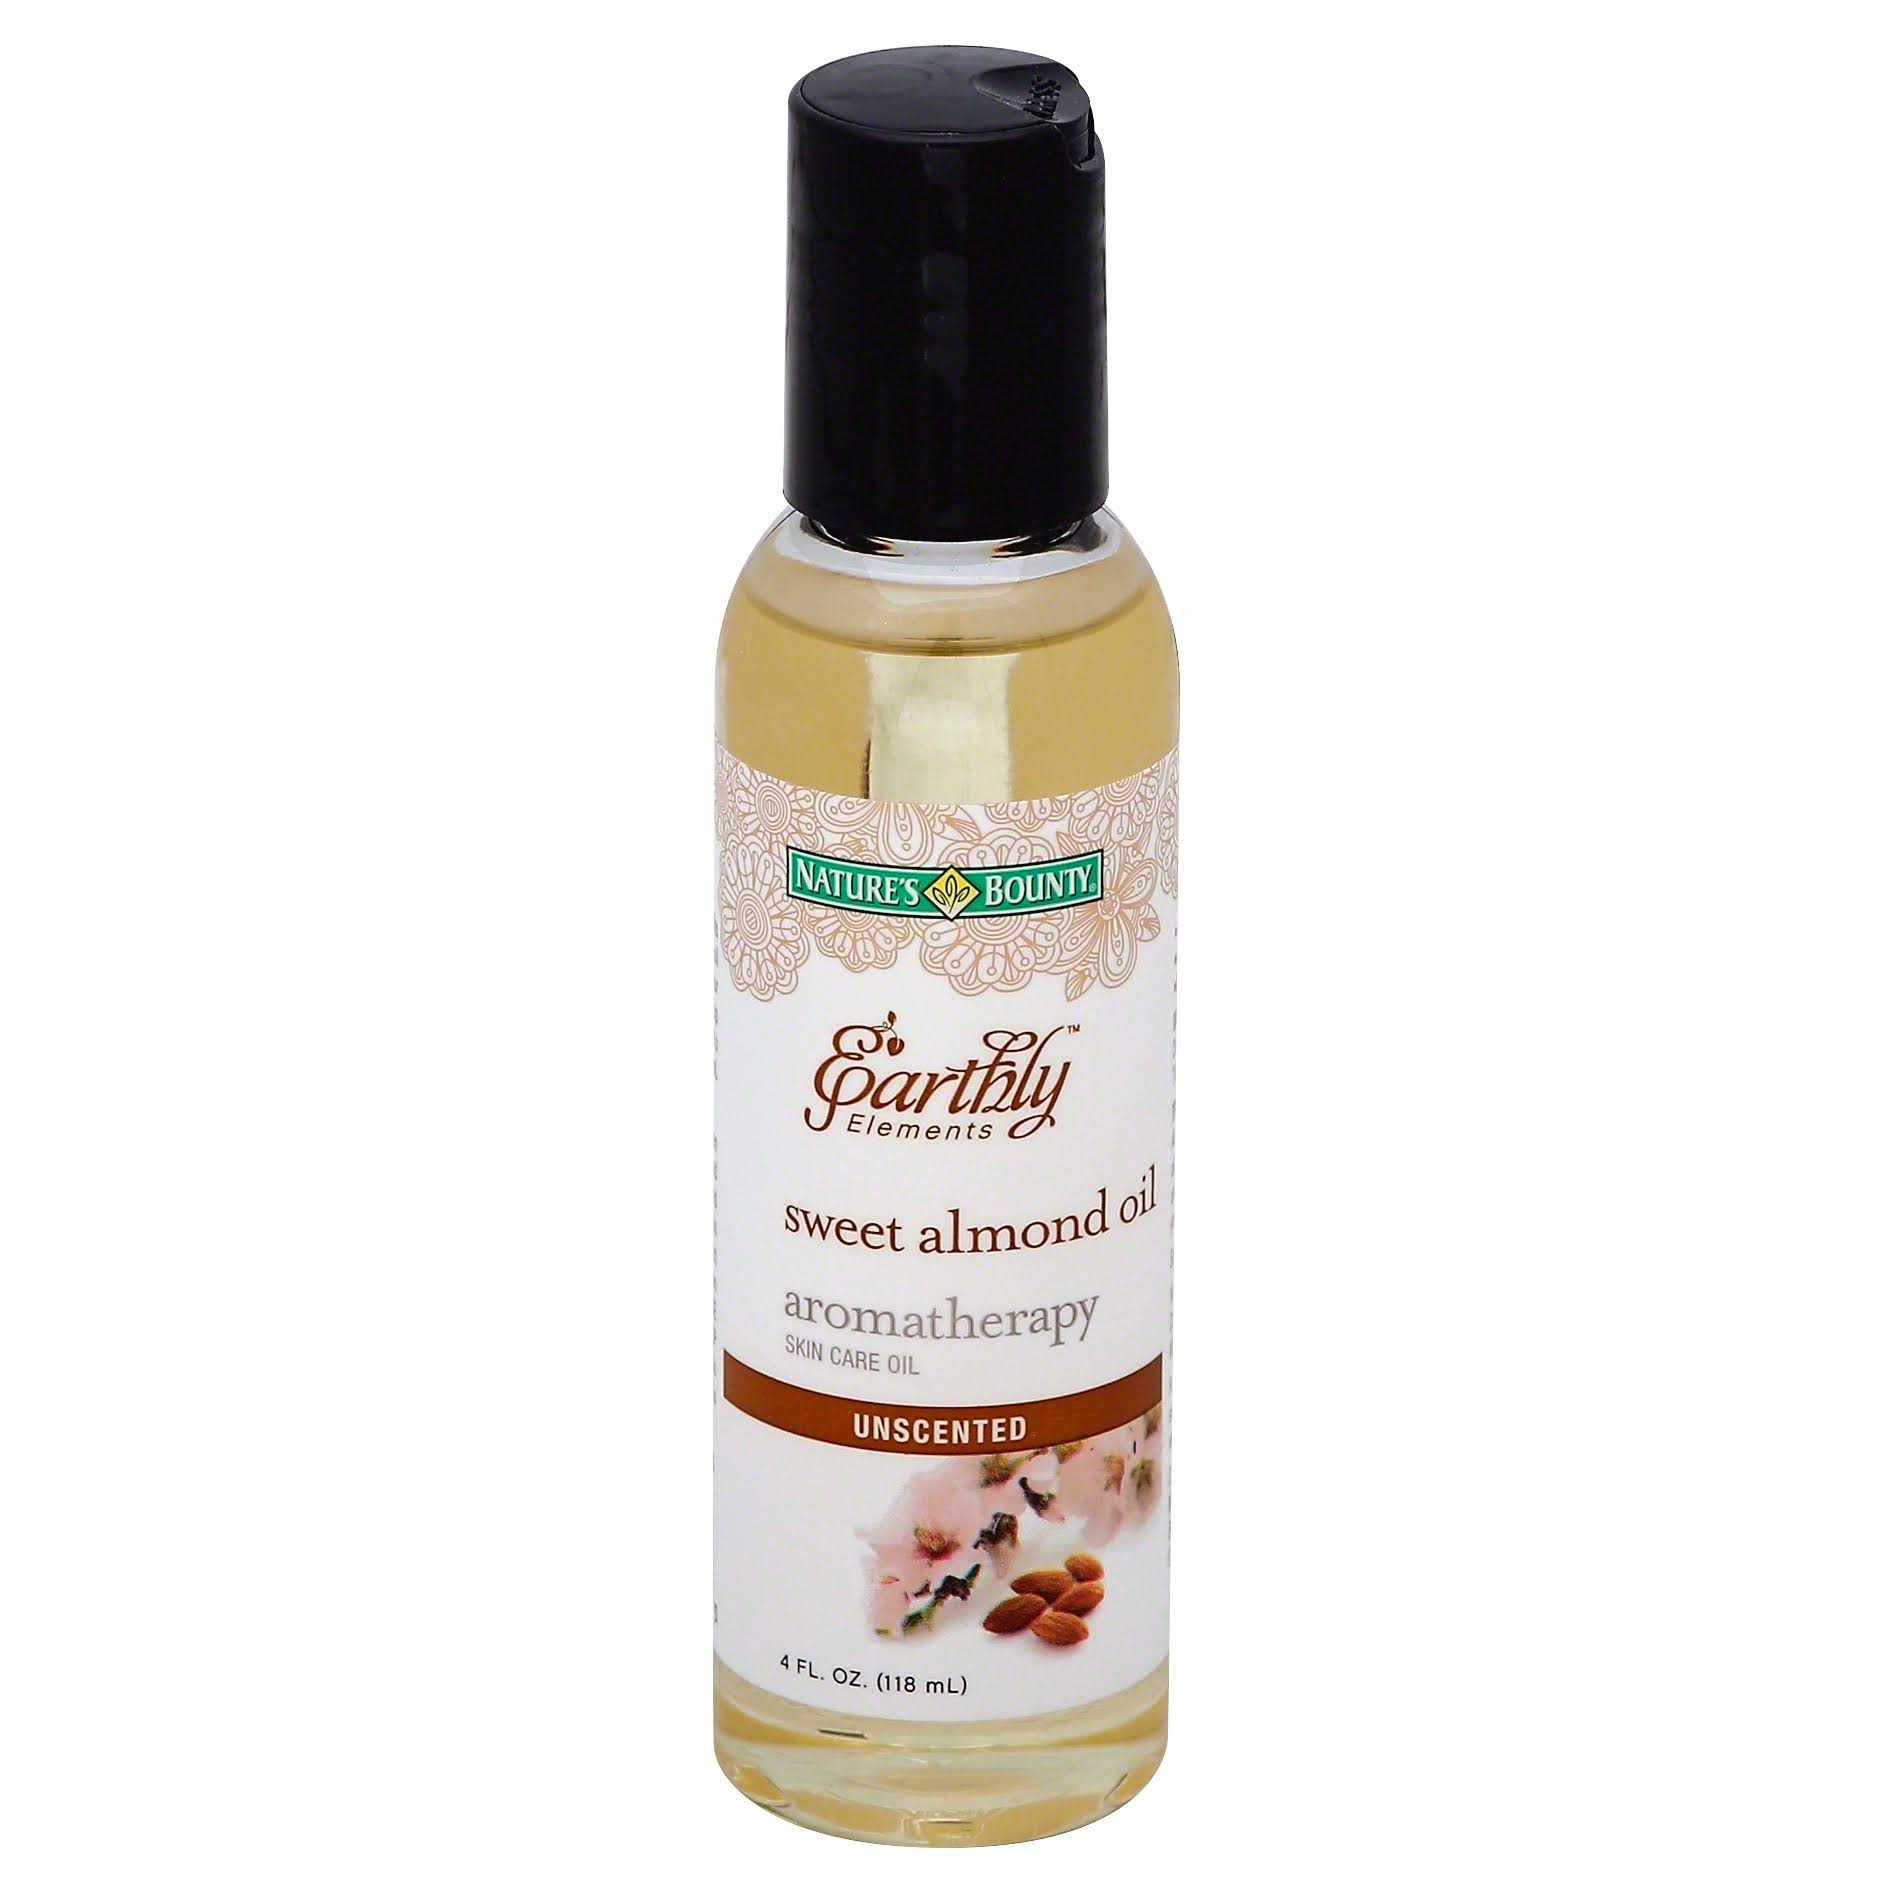 Nature's Bounty Earthly Elements Oil - Sweet Almond, 4 Oz